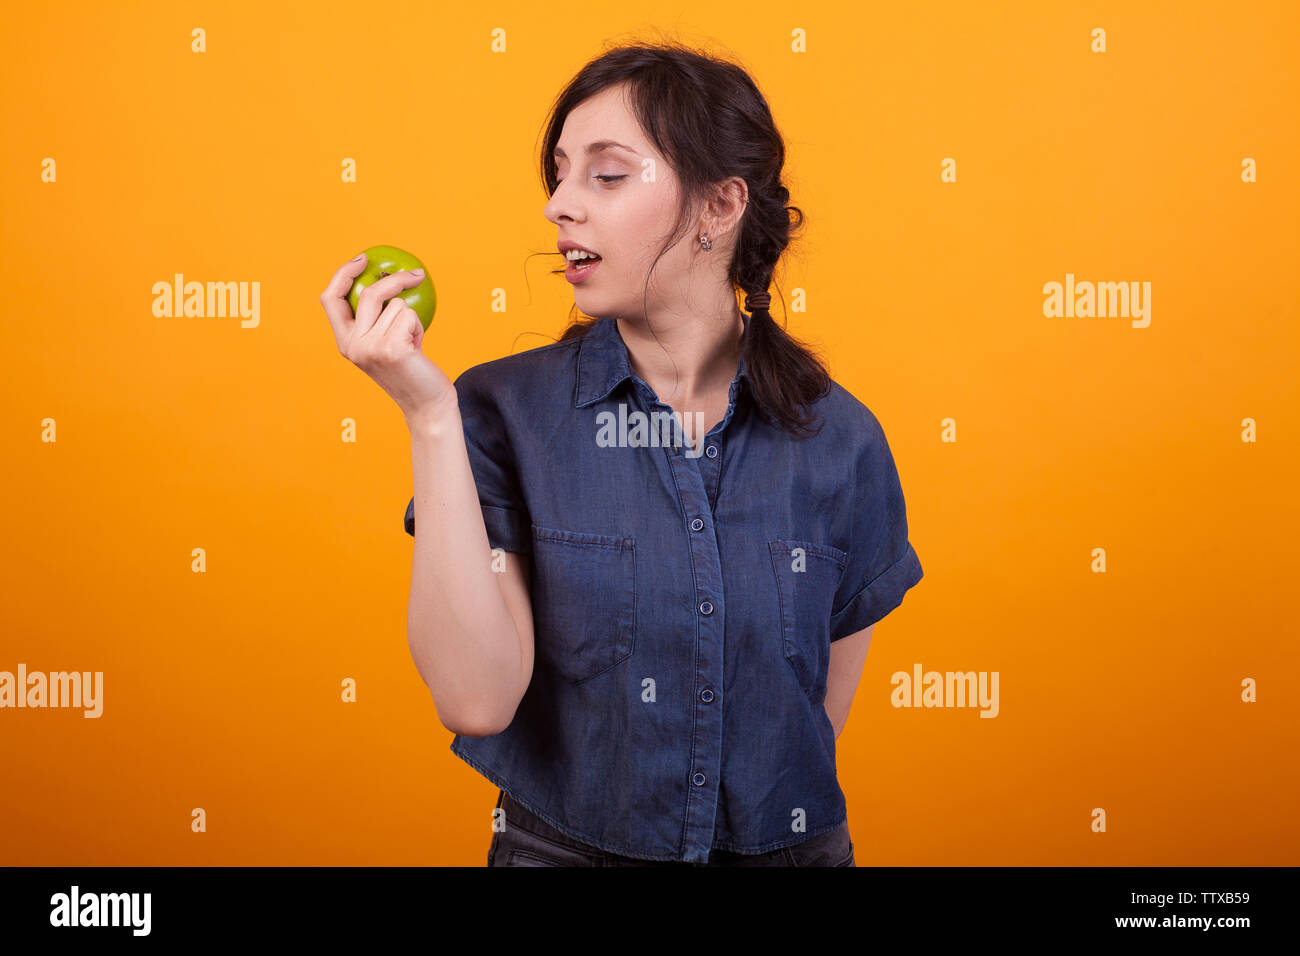 Side portrait of cheerful young woman holding and looking at a green apple in studio over yellow background. Woman promoting healthy lifestyle. Eating apples for skin care. Stock Photo